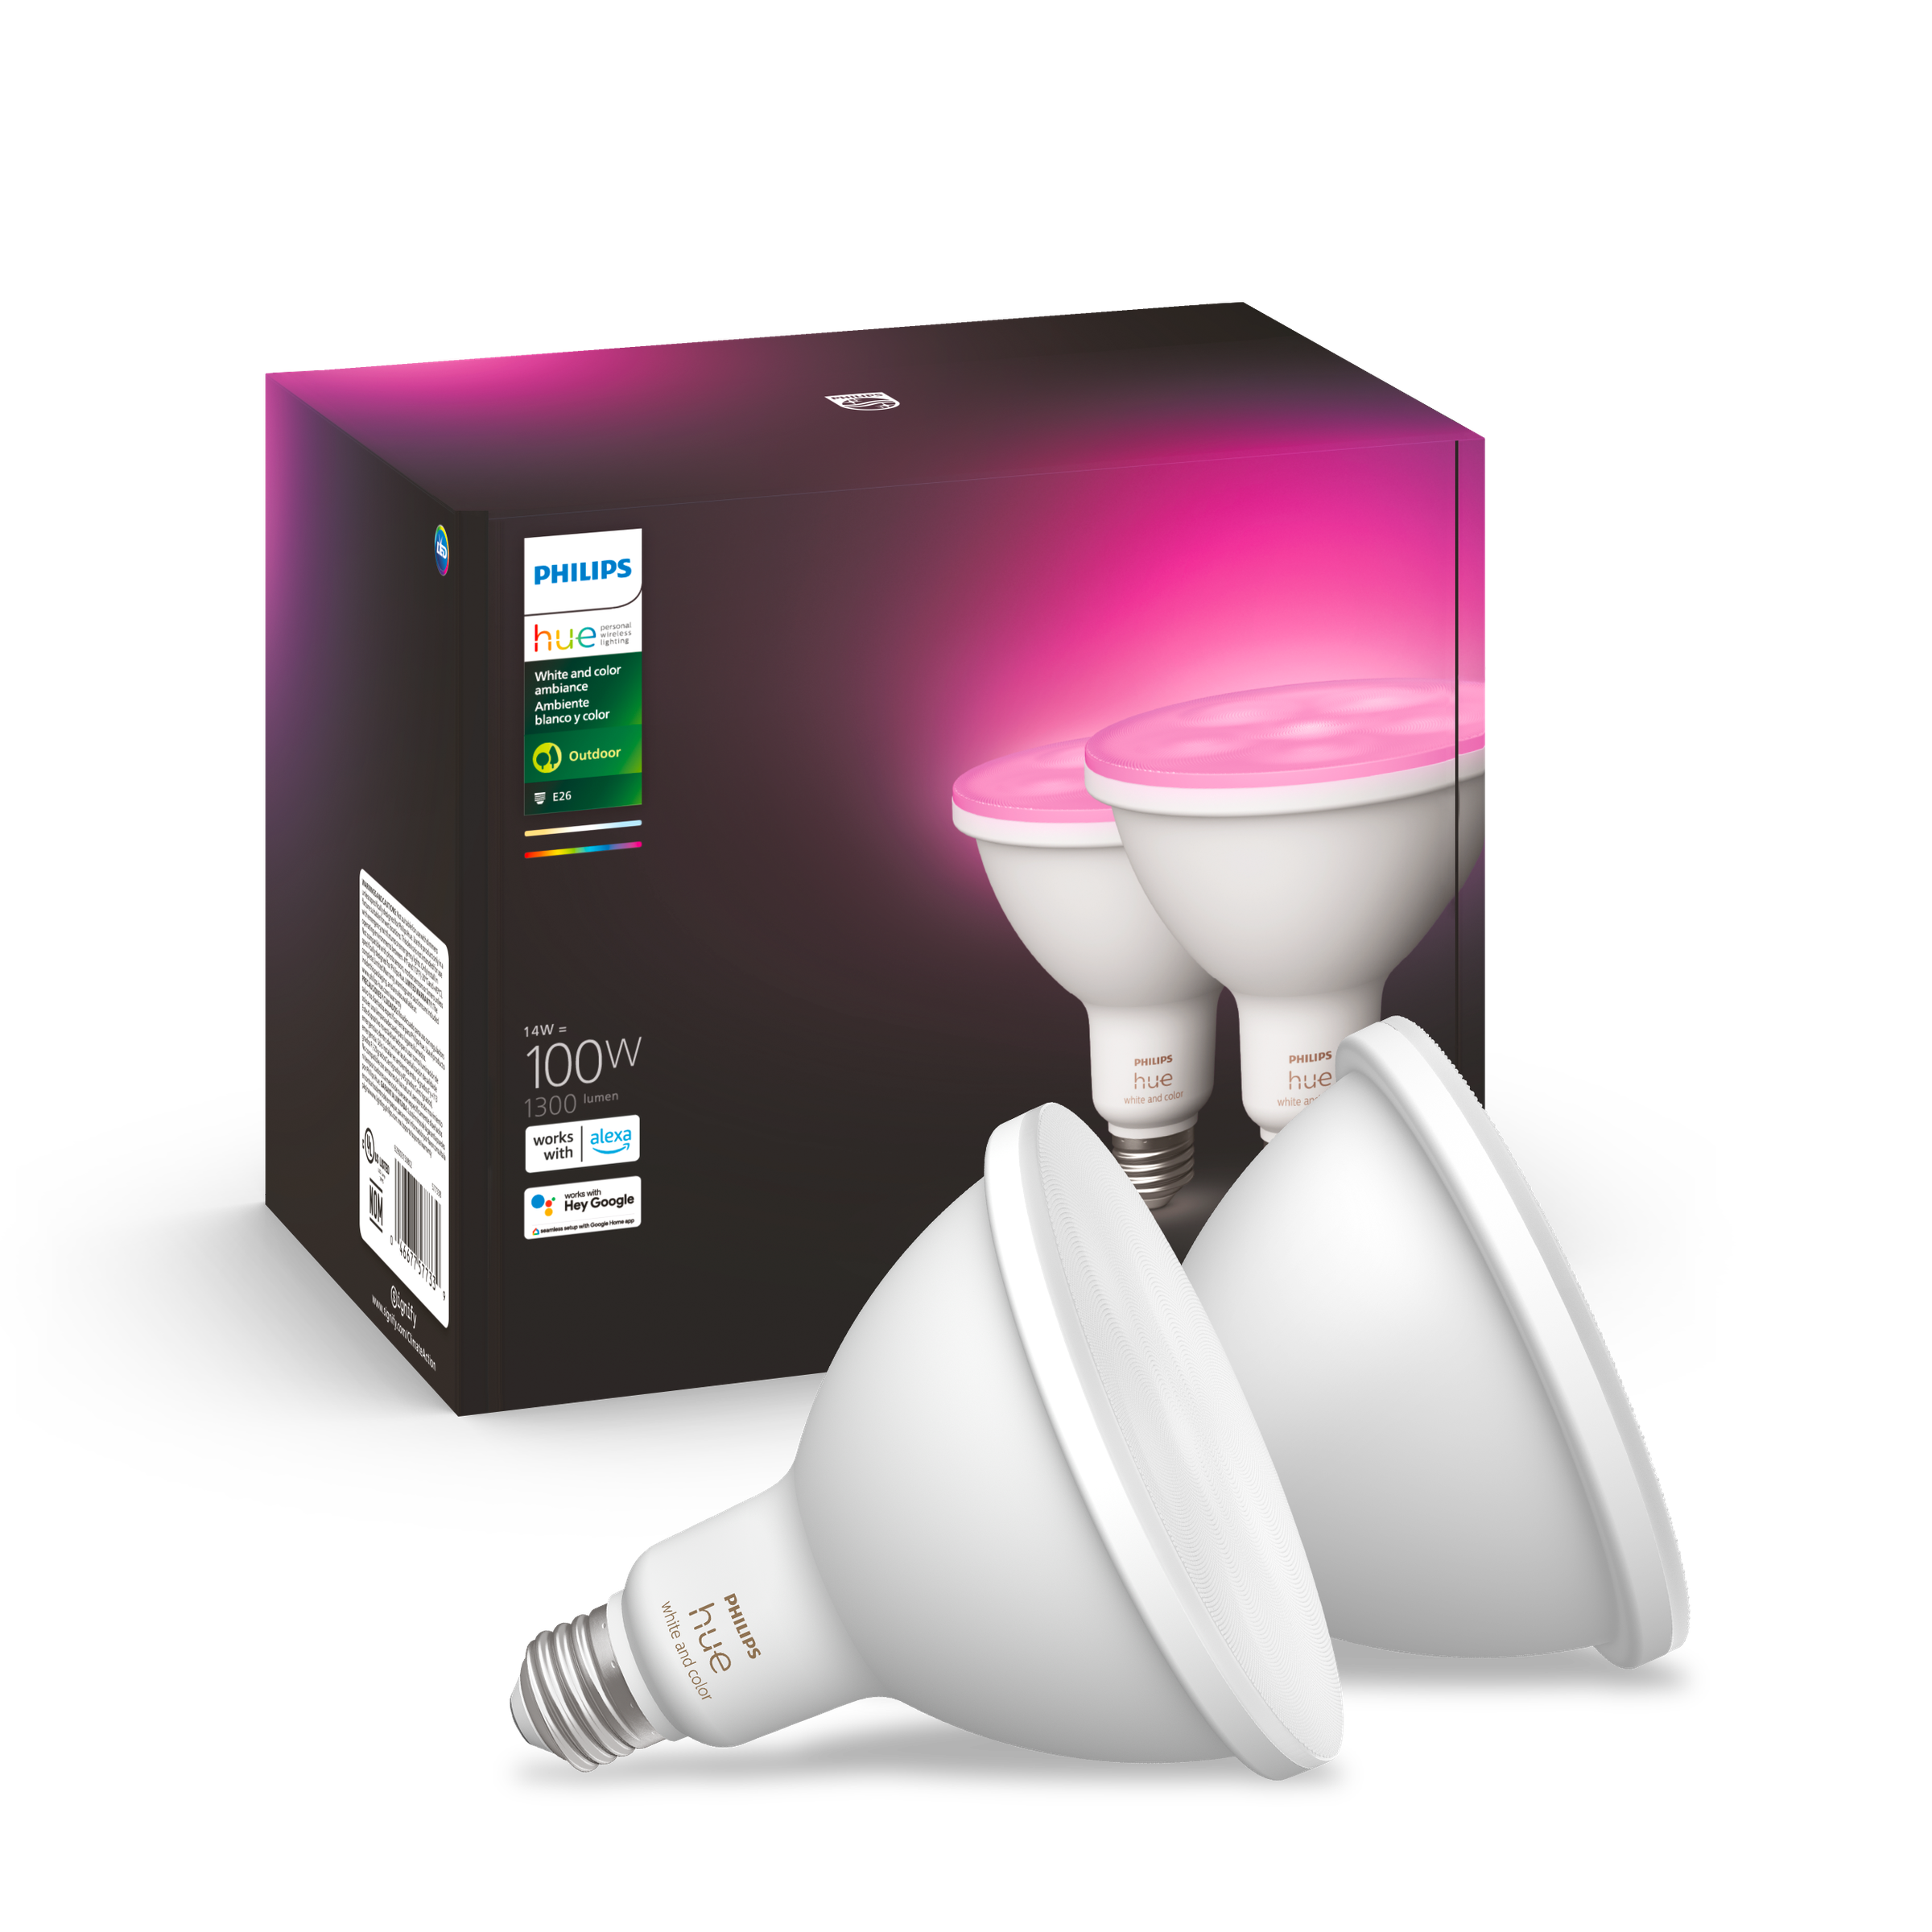 Signify also has new Philips Hue floodlights.